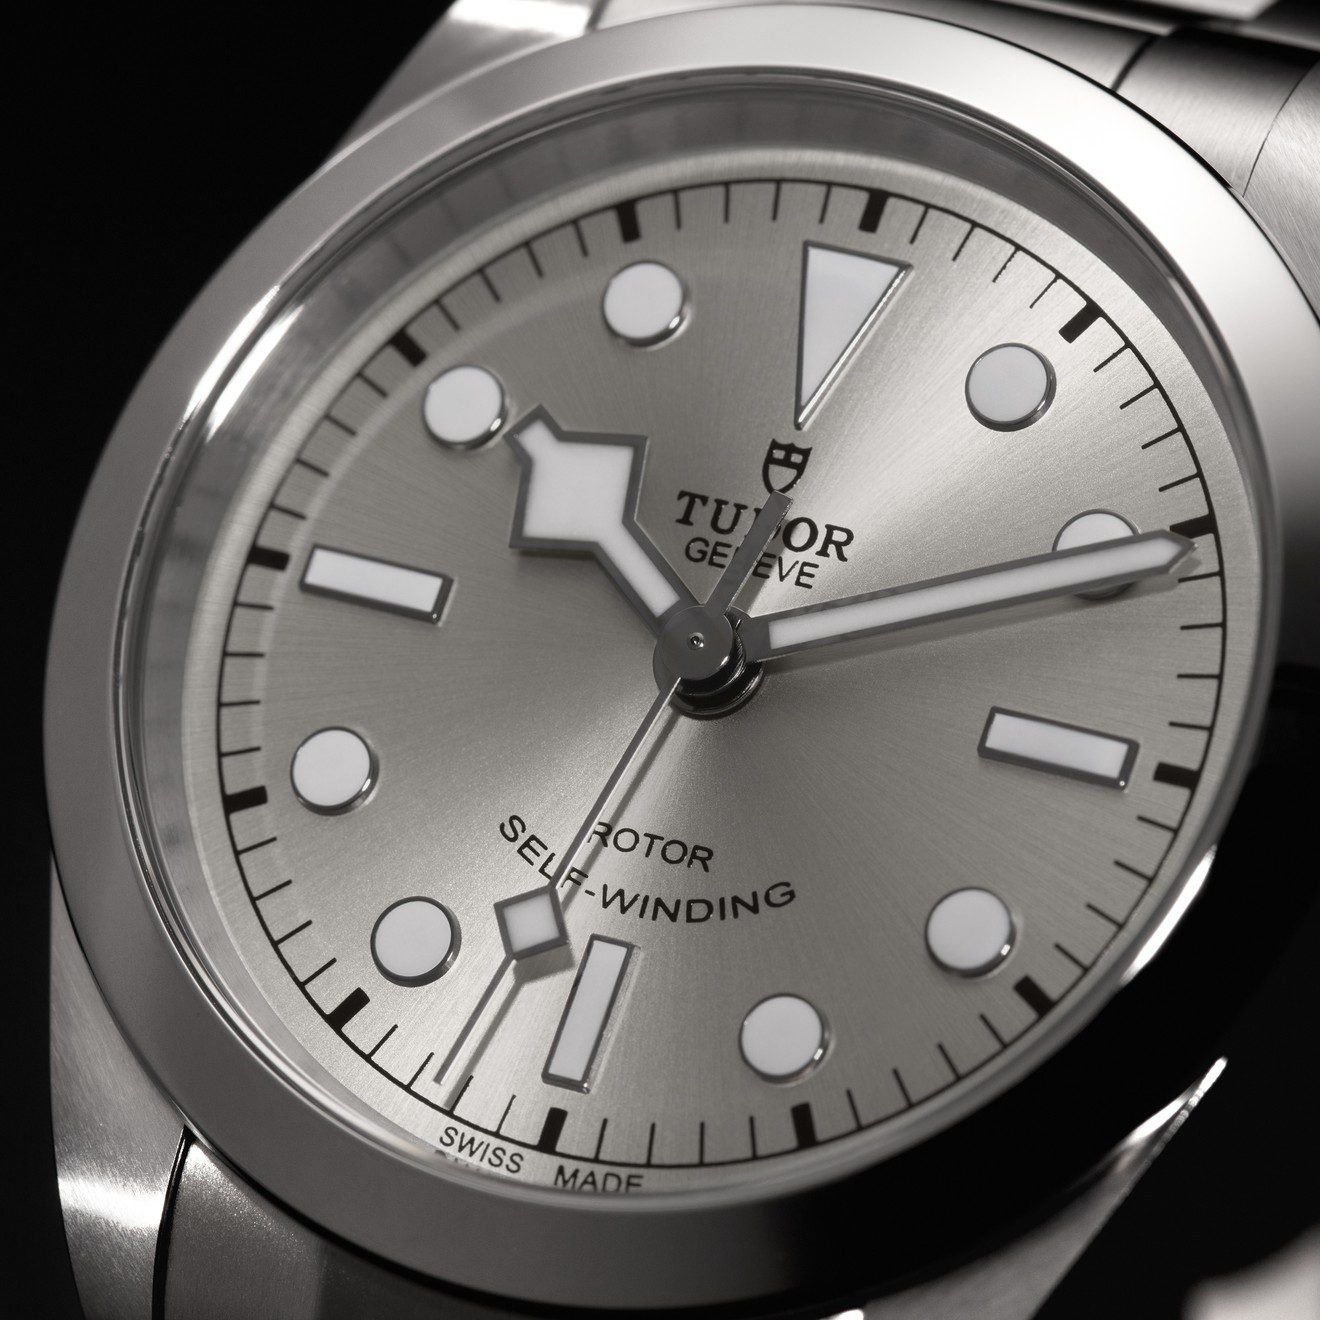 Watches & Wonders 2021 : Tudor introduces a new silver dial for the Black Bay